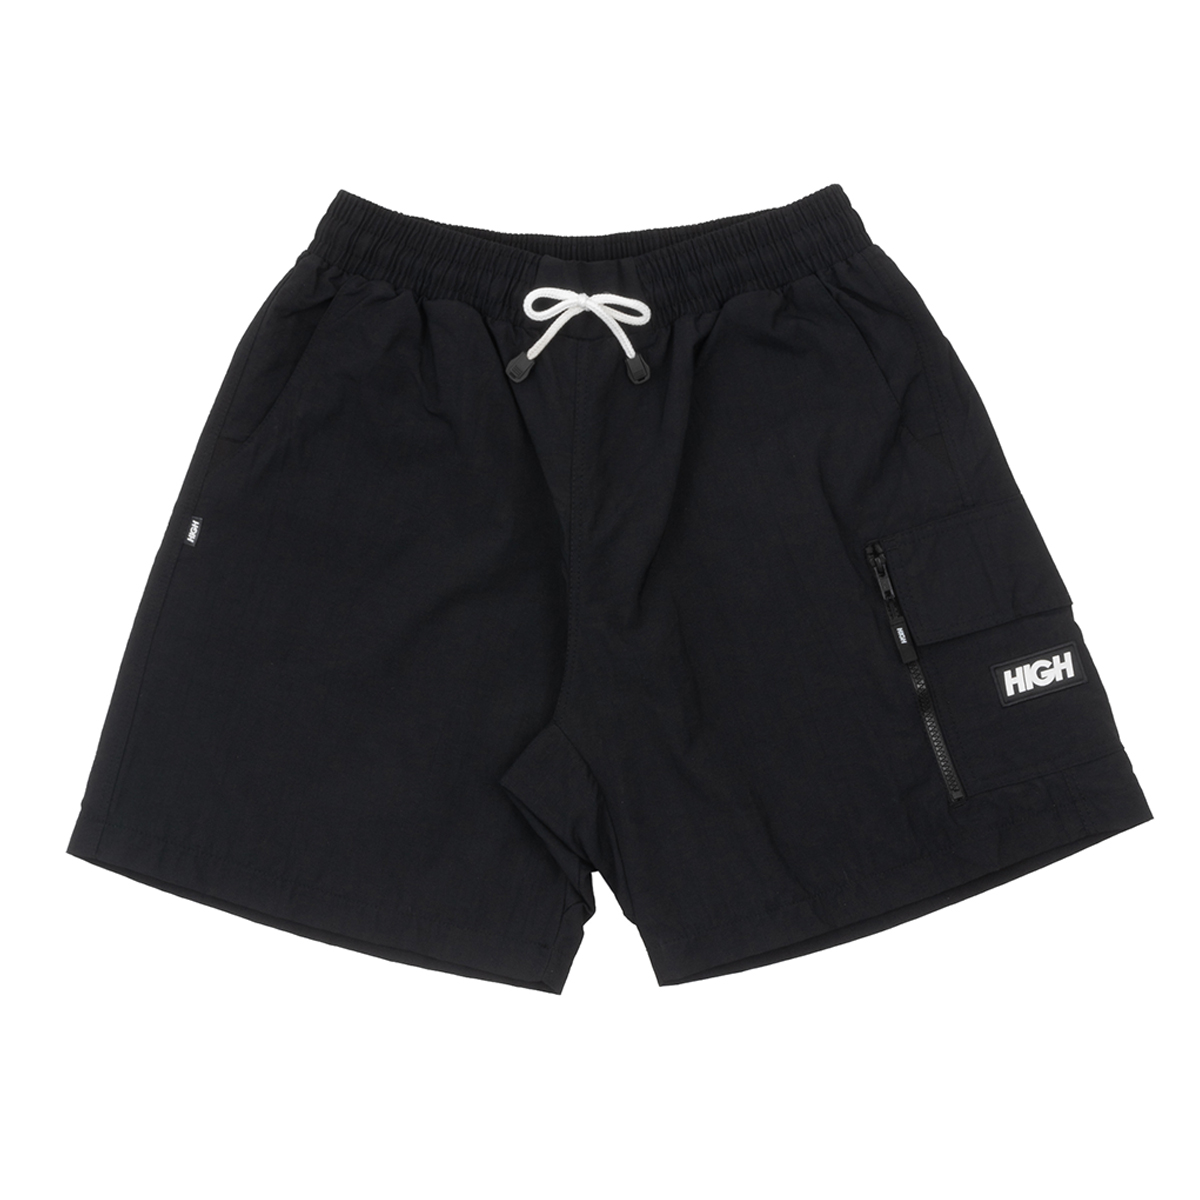 Shorts HIGH Colored Zipped Cargo Black